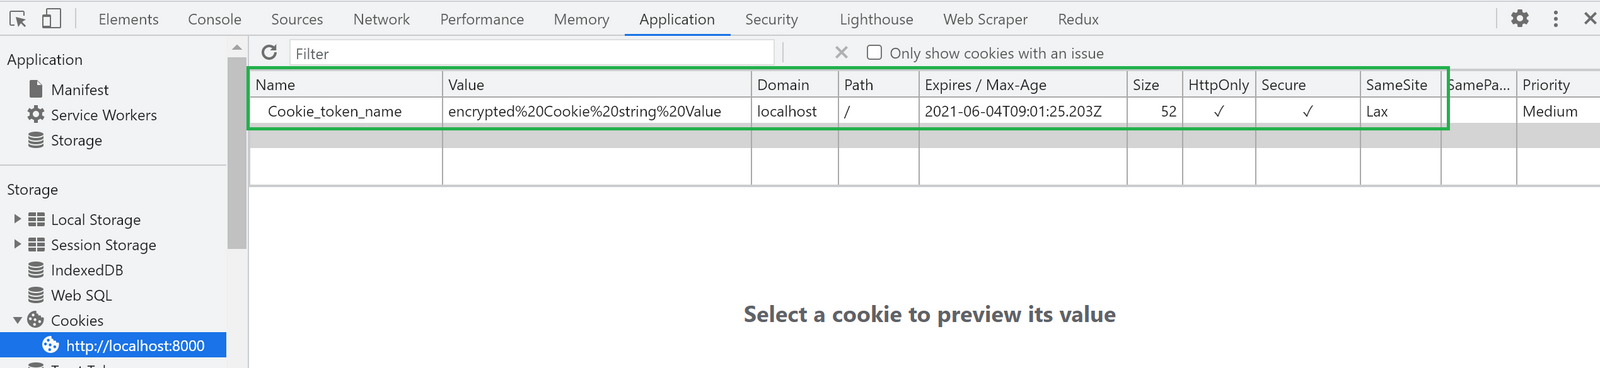 Cookies updated security values